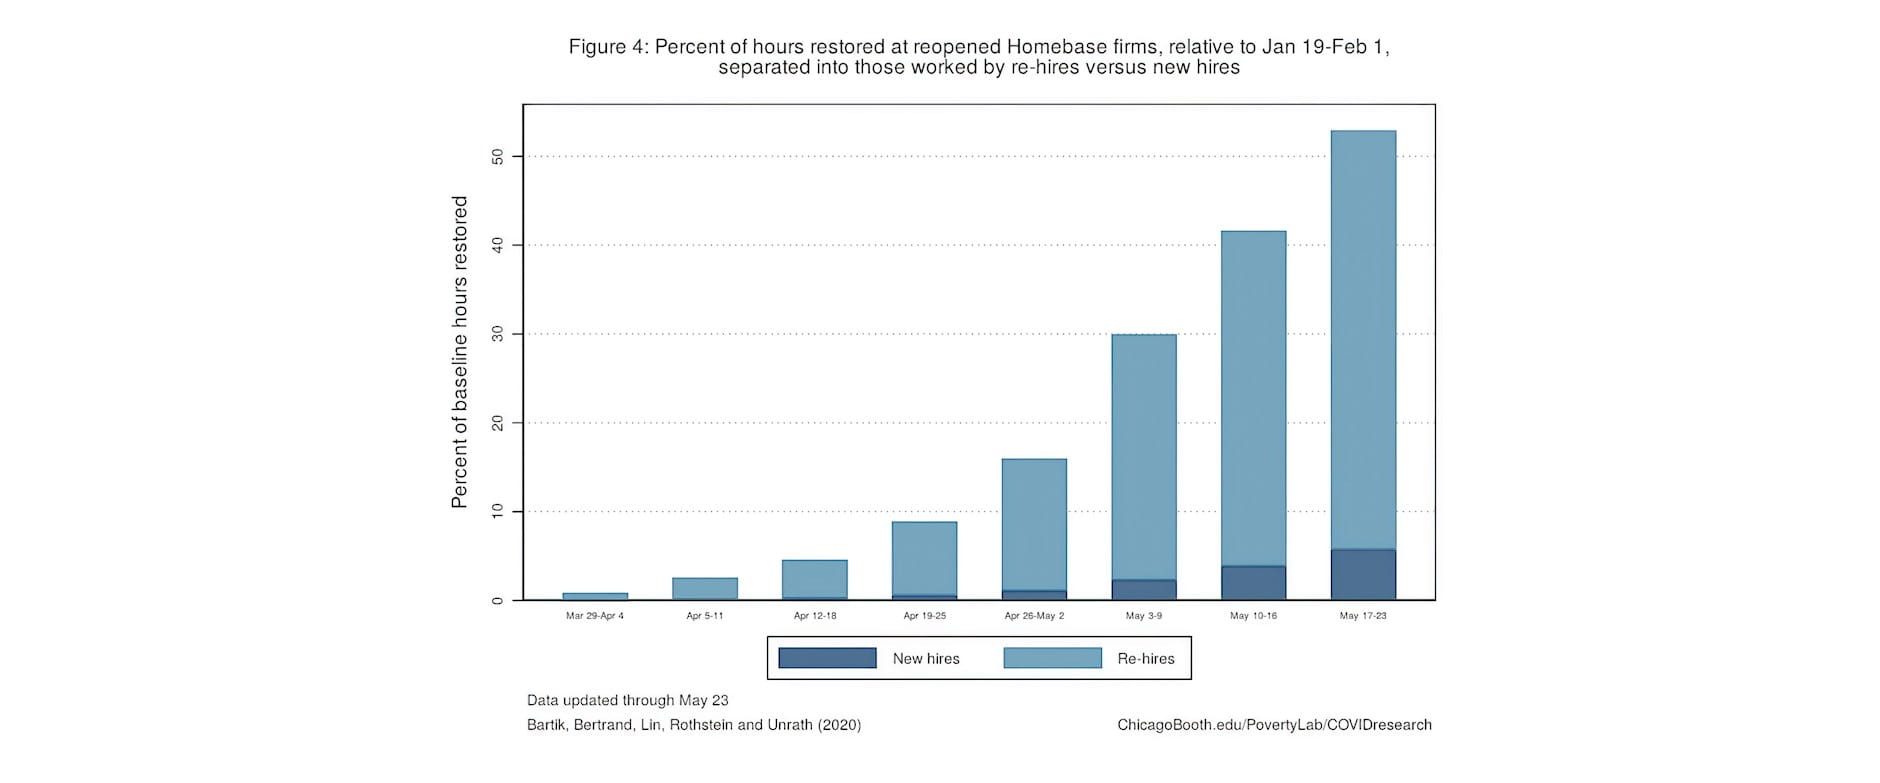 Figure 4: Percent of hours restored at reopened Homebase firms, relative to Jan 19-Feb 1